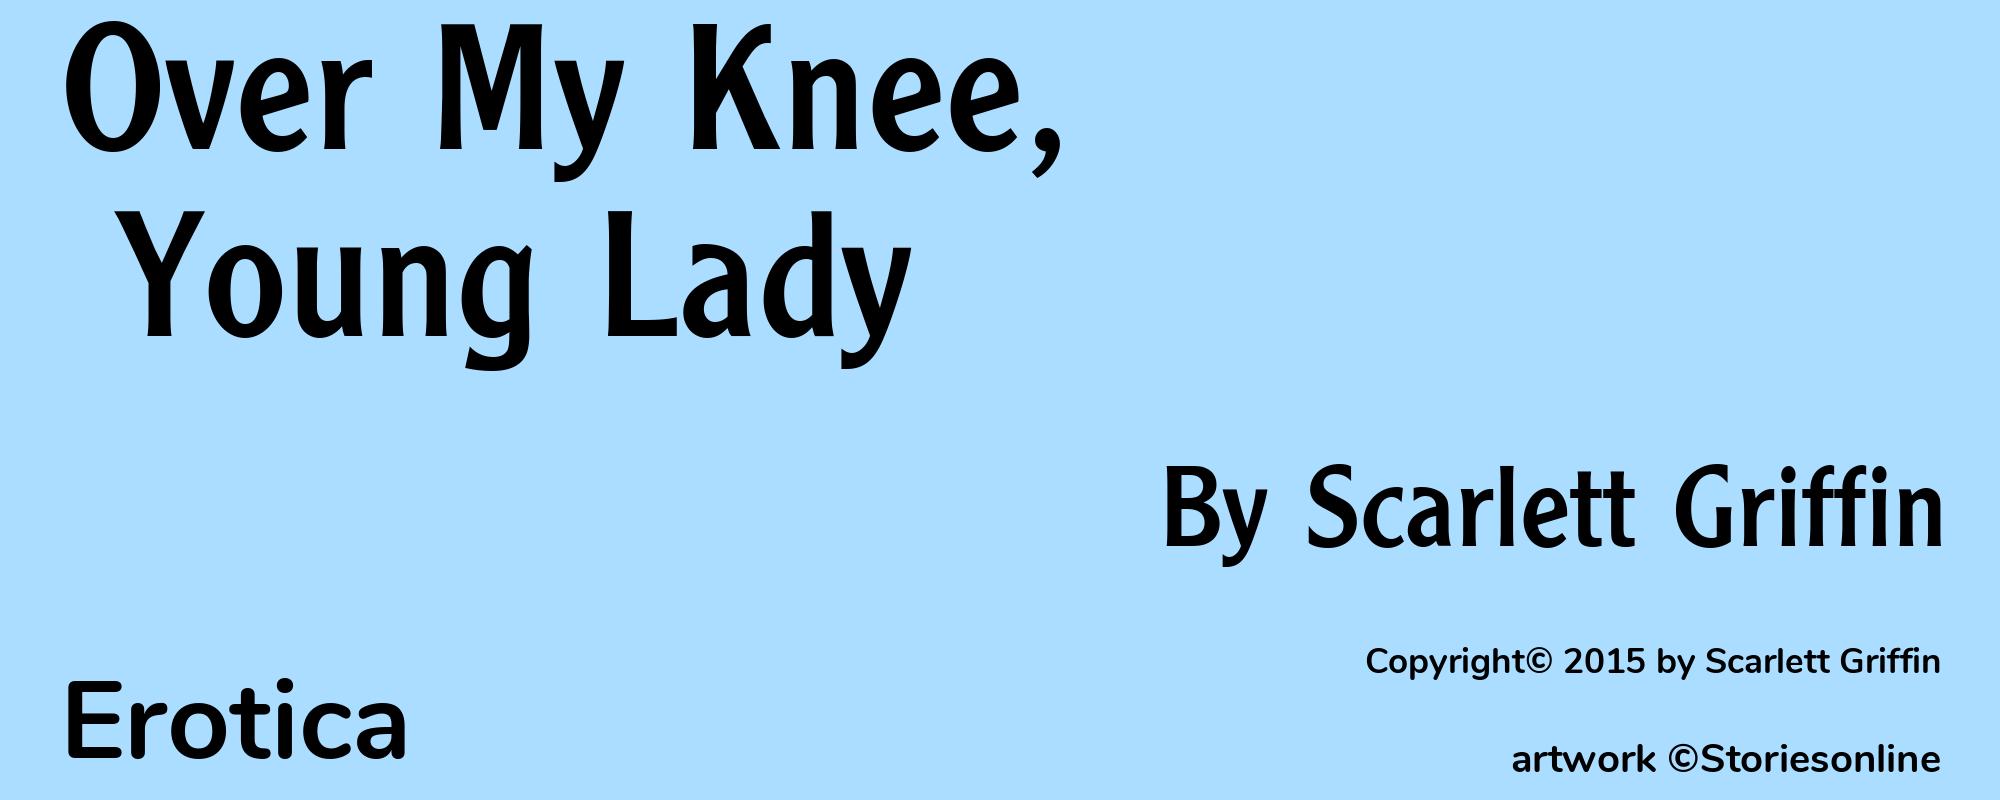 Over My Knee, Young Lady - Cover